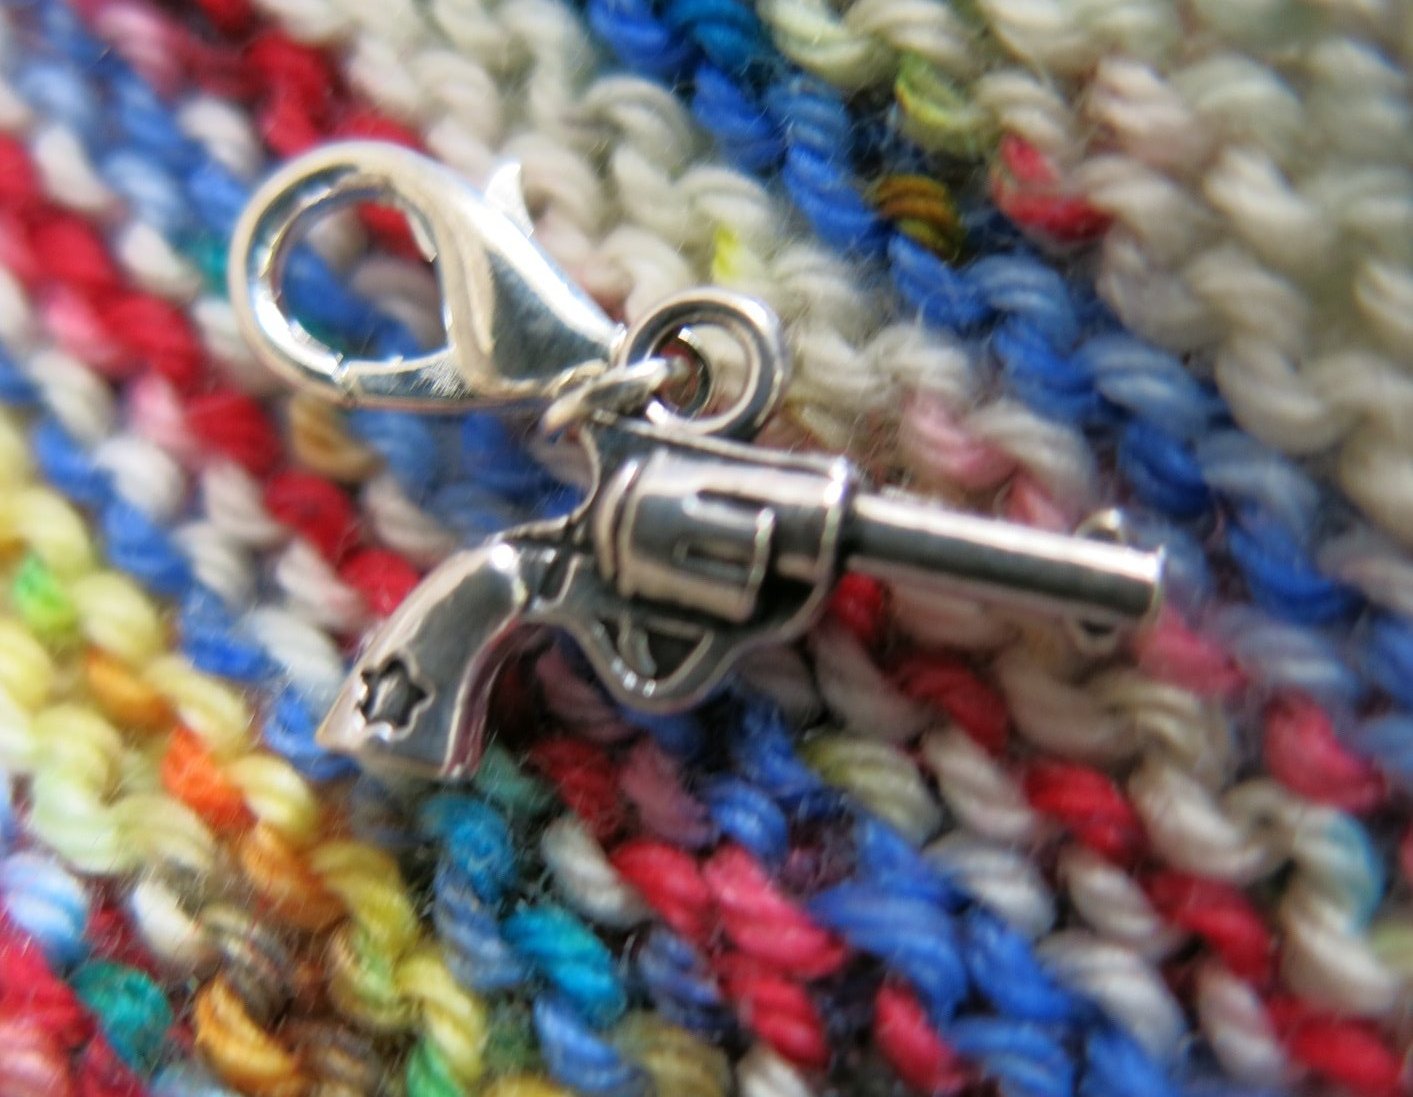 3d pistol charm for knitting or crochet projects and zipper pulls